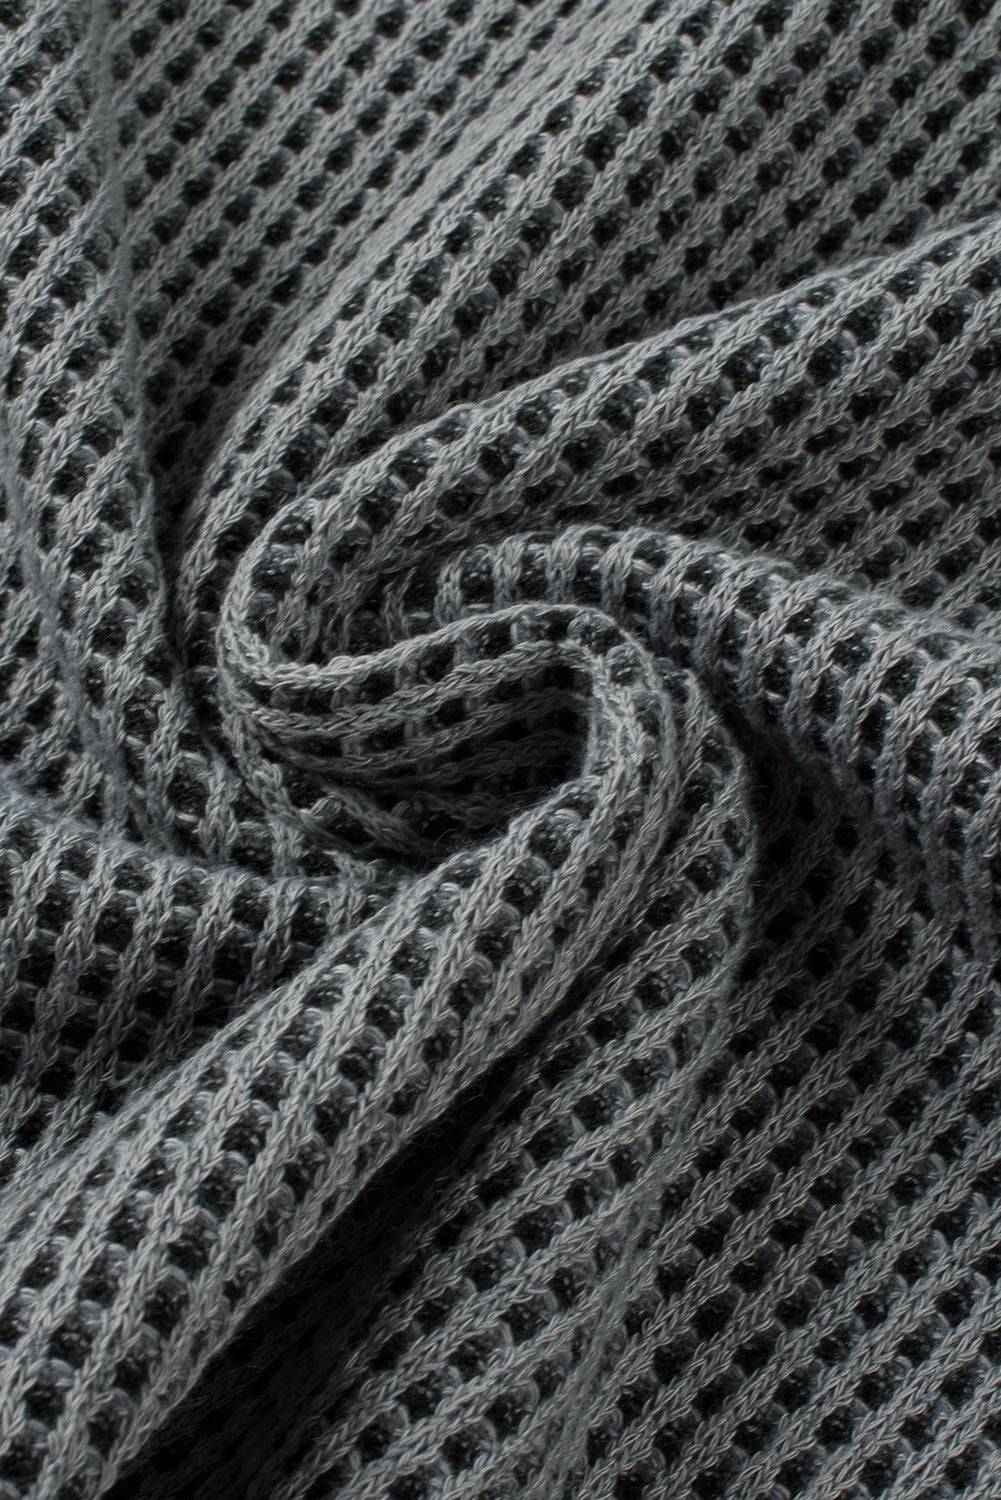 a close up of a gray knitted fabric